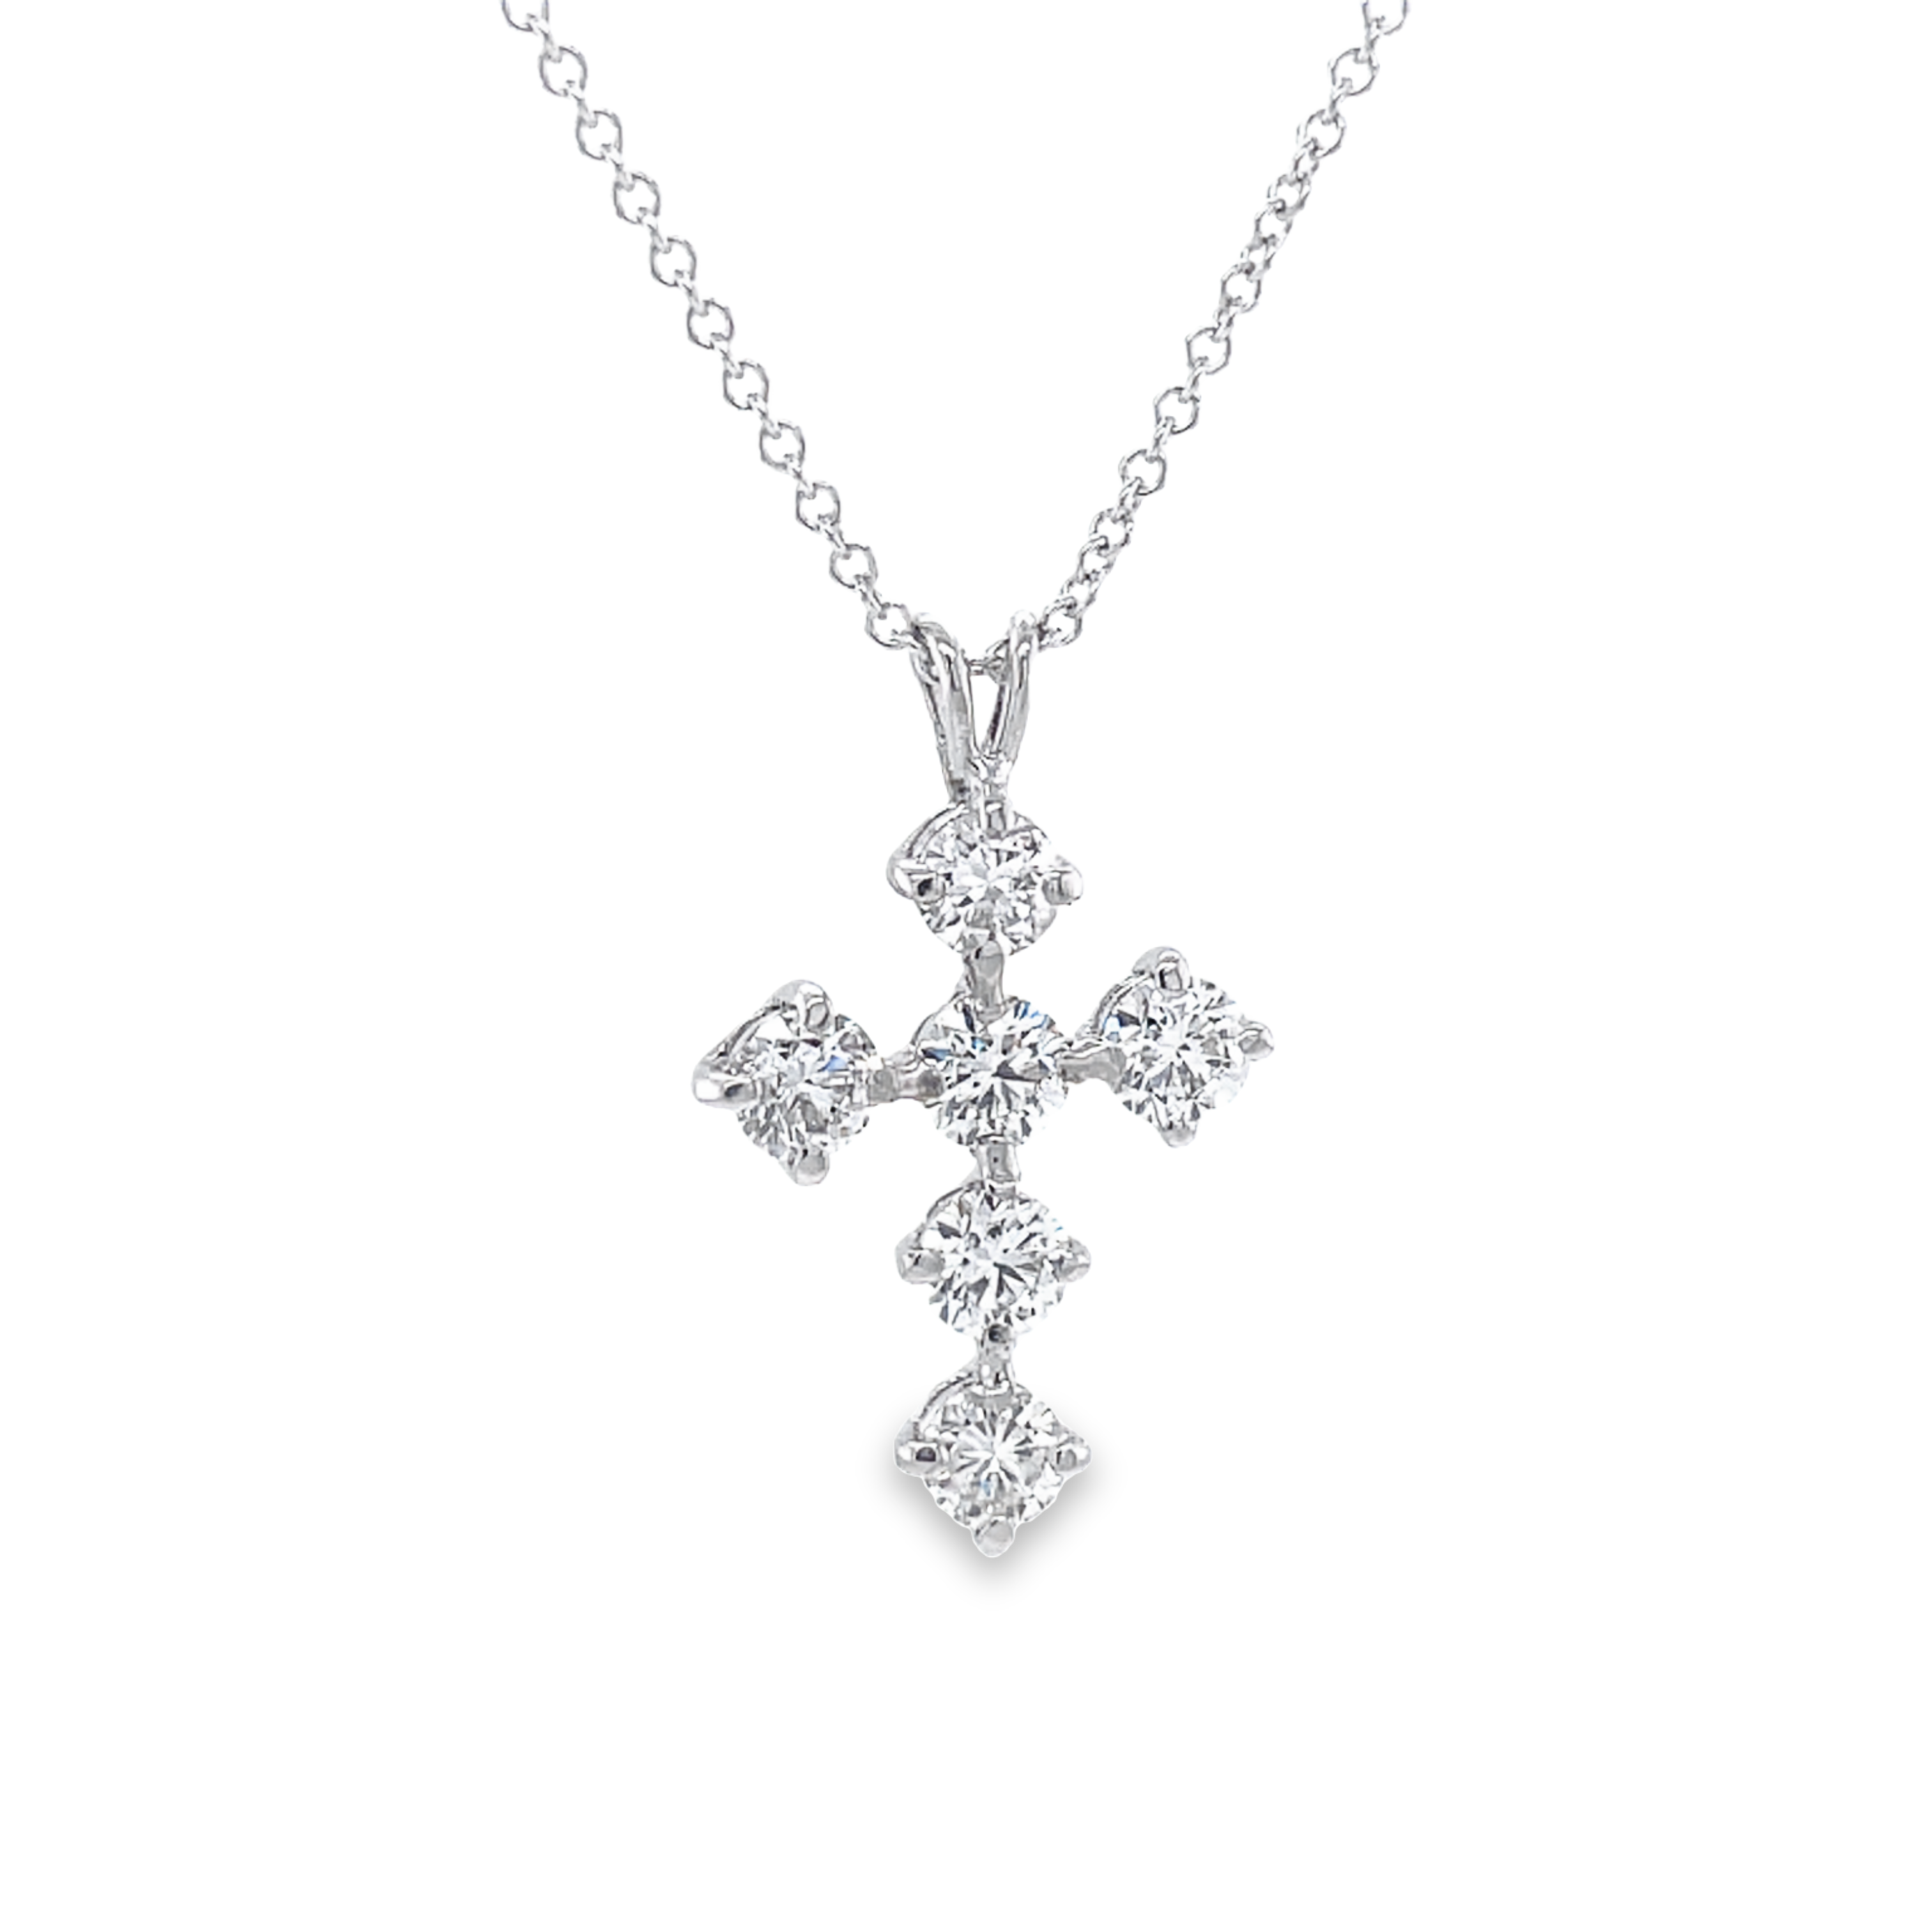 This stunning Classic Share Prong Diamond Cross Pendant Necklace is a timeless piece. Crafted from 18k white gold, it features a diamond cross with 1.00 cts of color E/F and VS1 clarity, for a beautiful sparkle. Perfect for any special occasion.  Chain is optional (18" long $325.00).